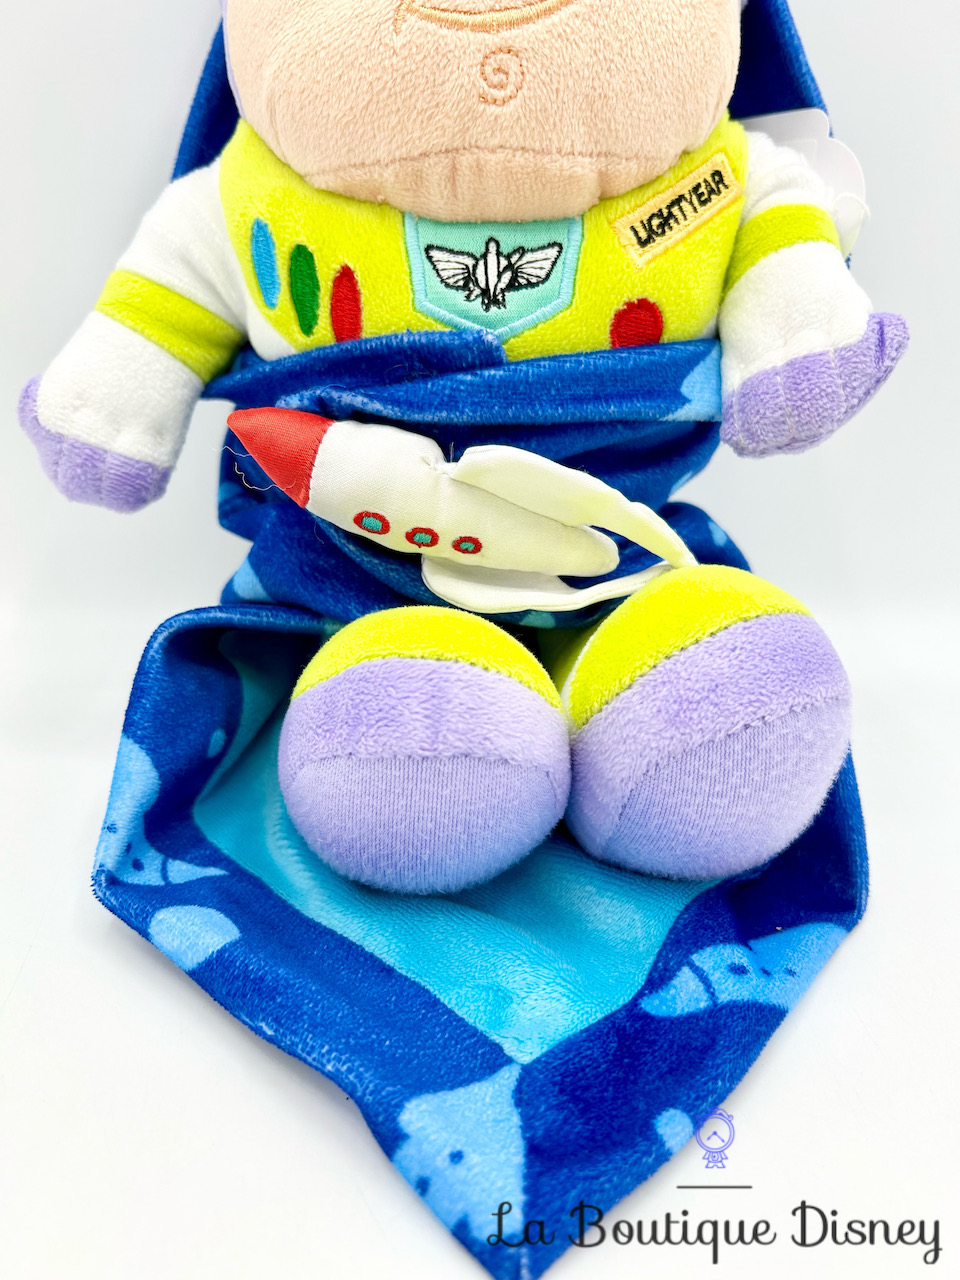 peluche-buzz-éclair-disney-babies-disneyland-couverture-couffin-toy-story-4